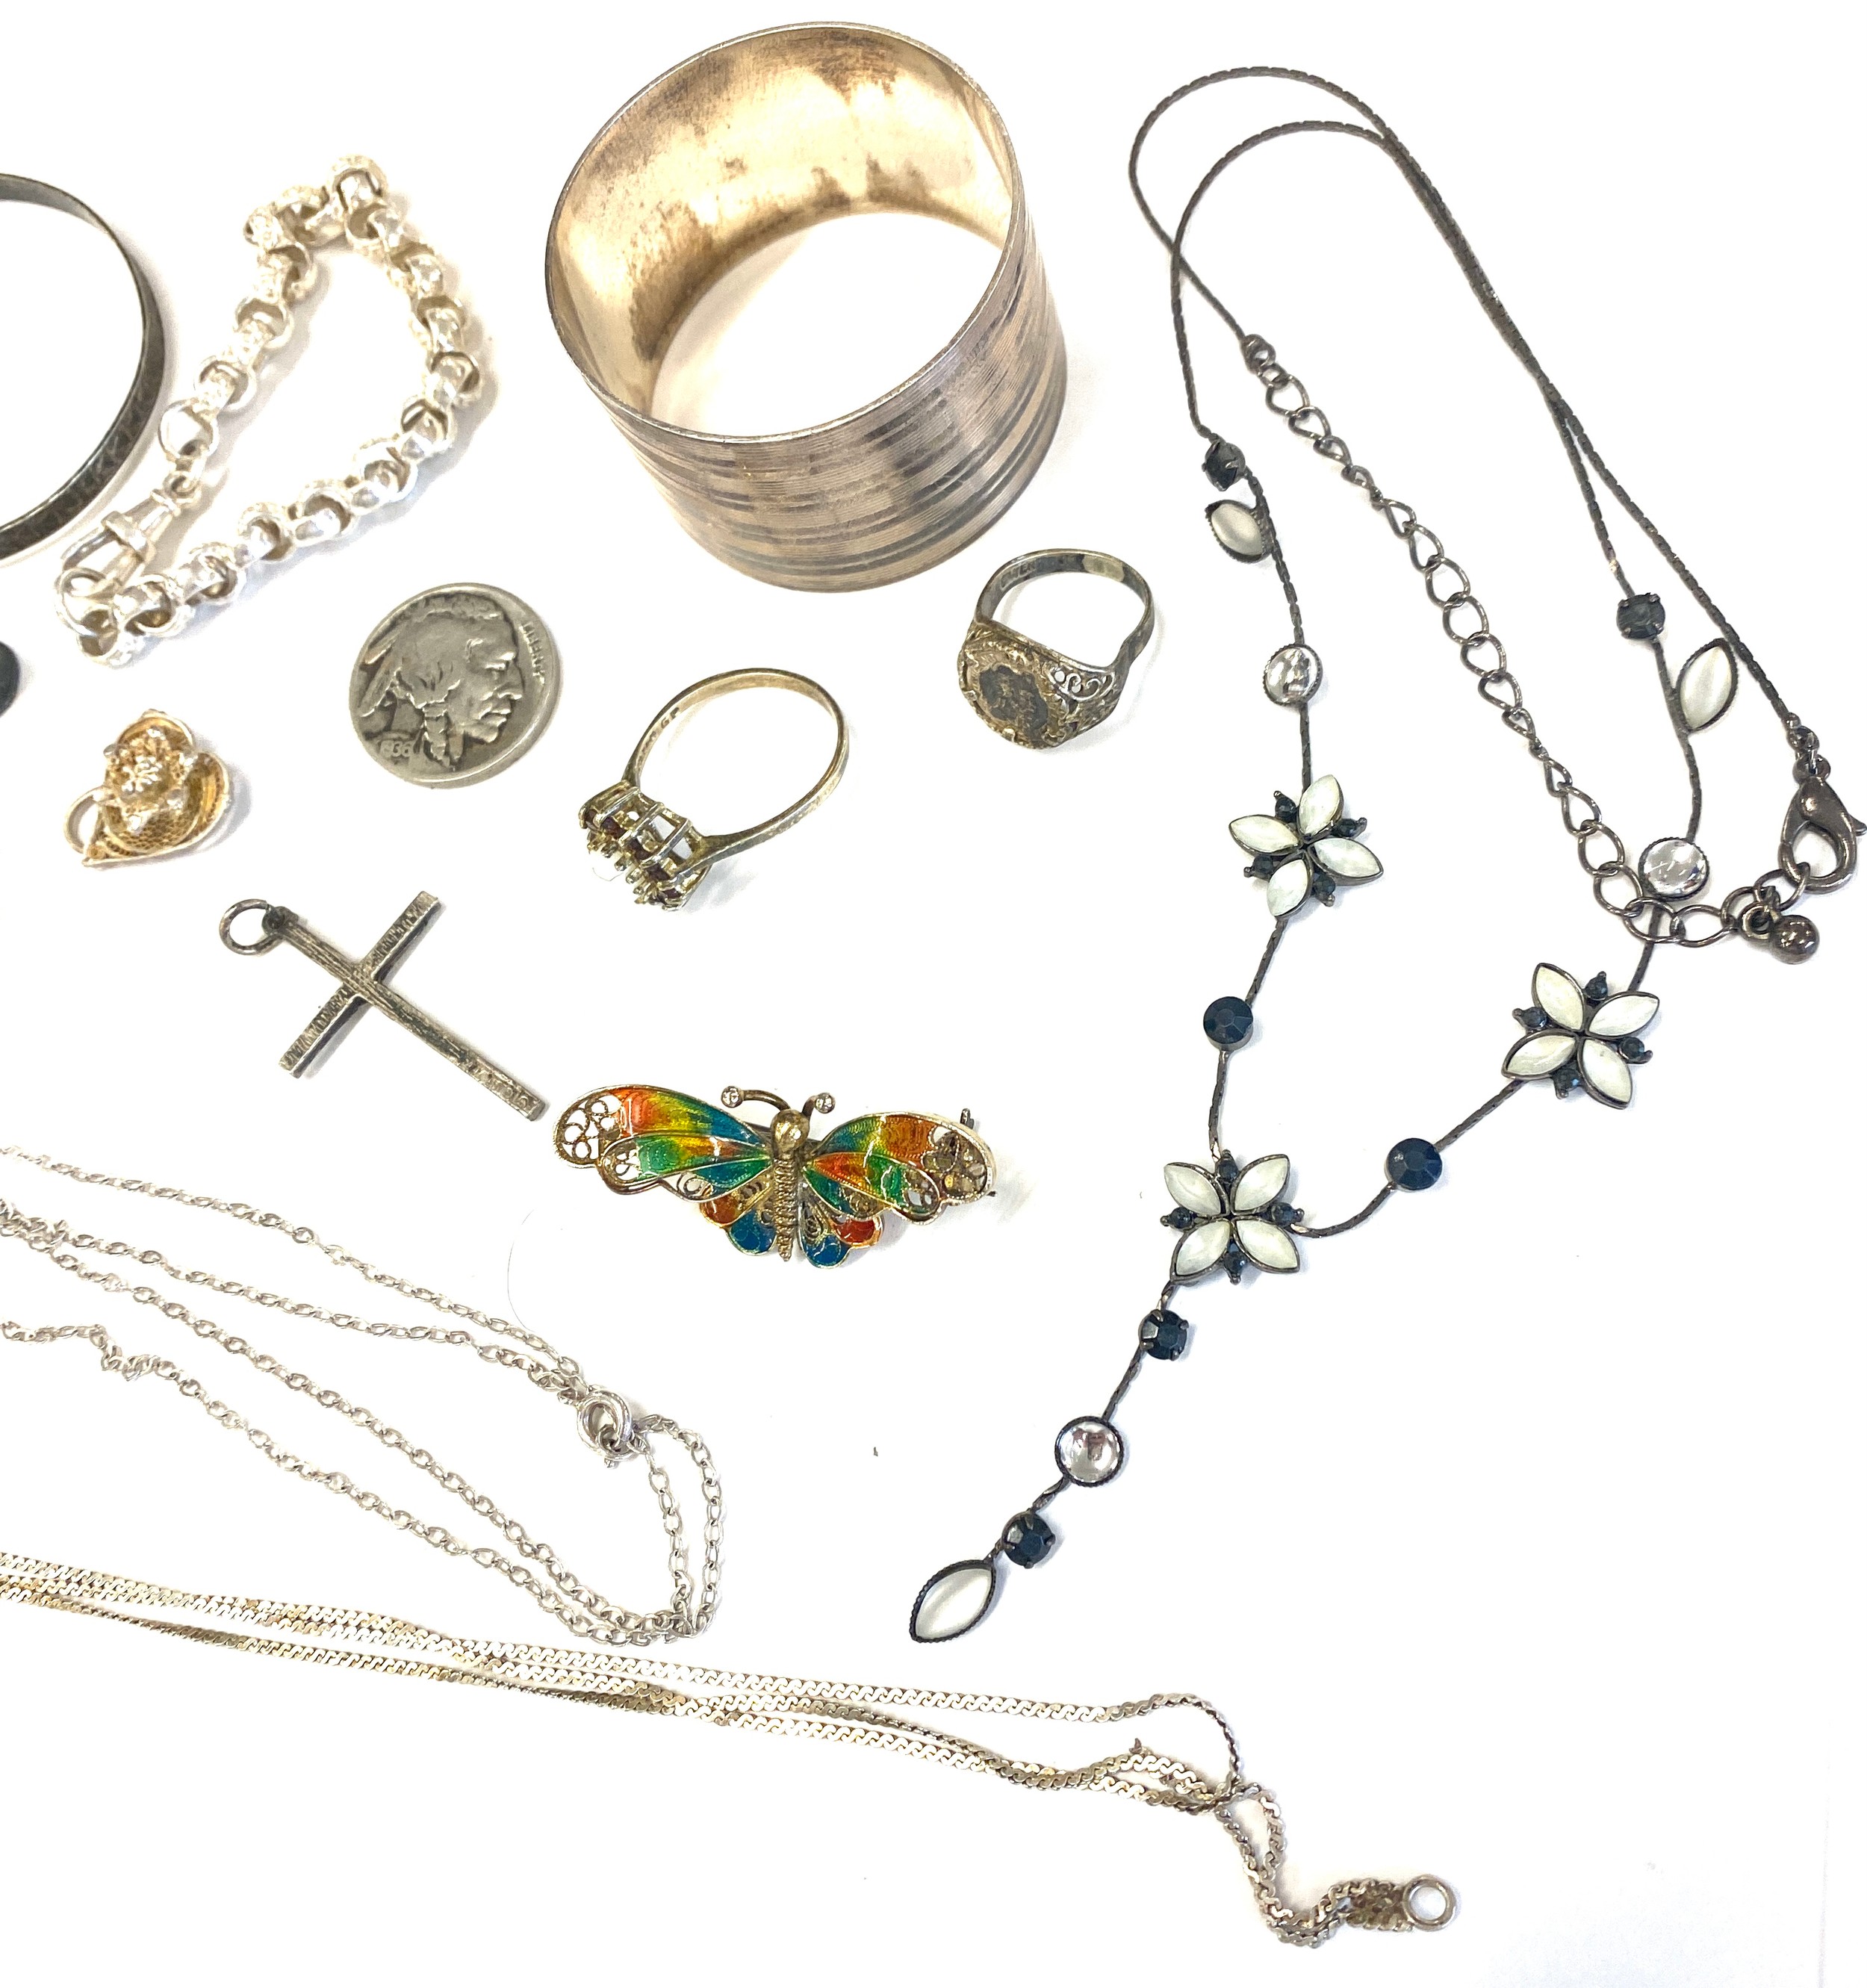 Selection silver items to include jewellery, napkin ring etc, approximate weight 80g - Image 3 of 3